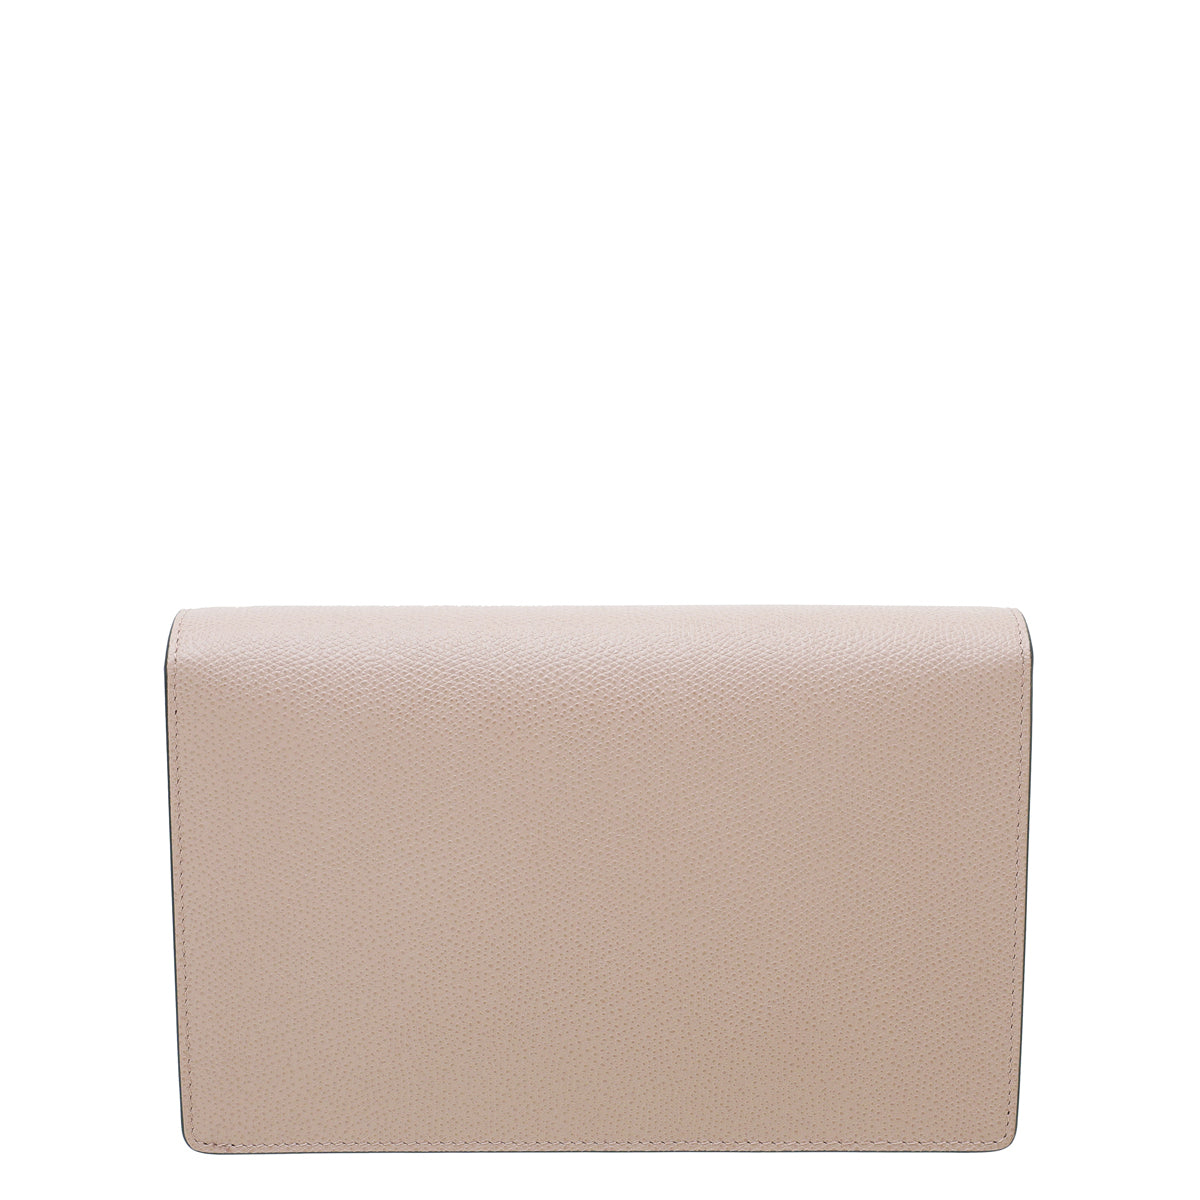 Christian Dior Dusty Pink Saddle Wallet On Chain Bag